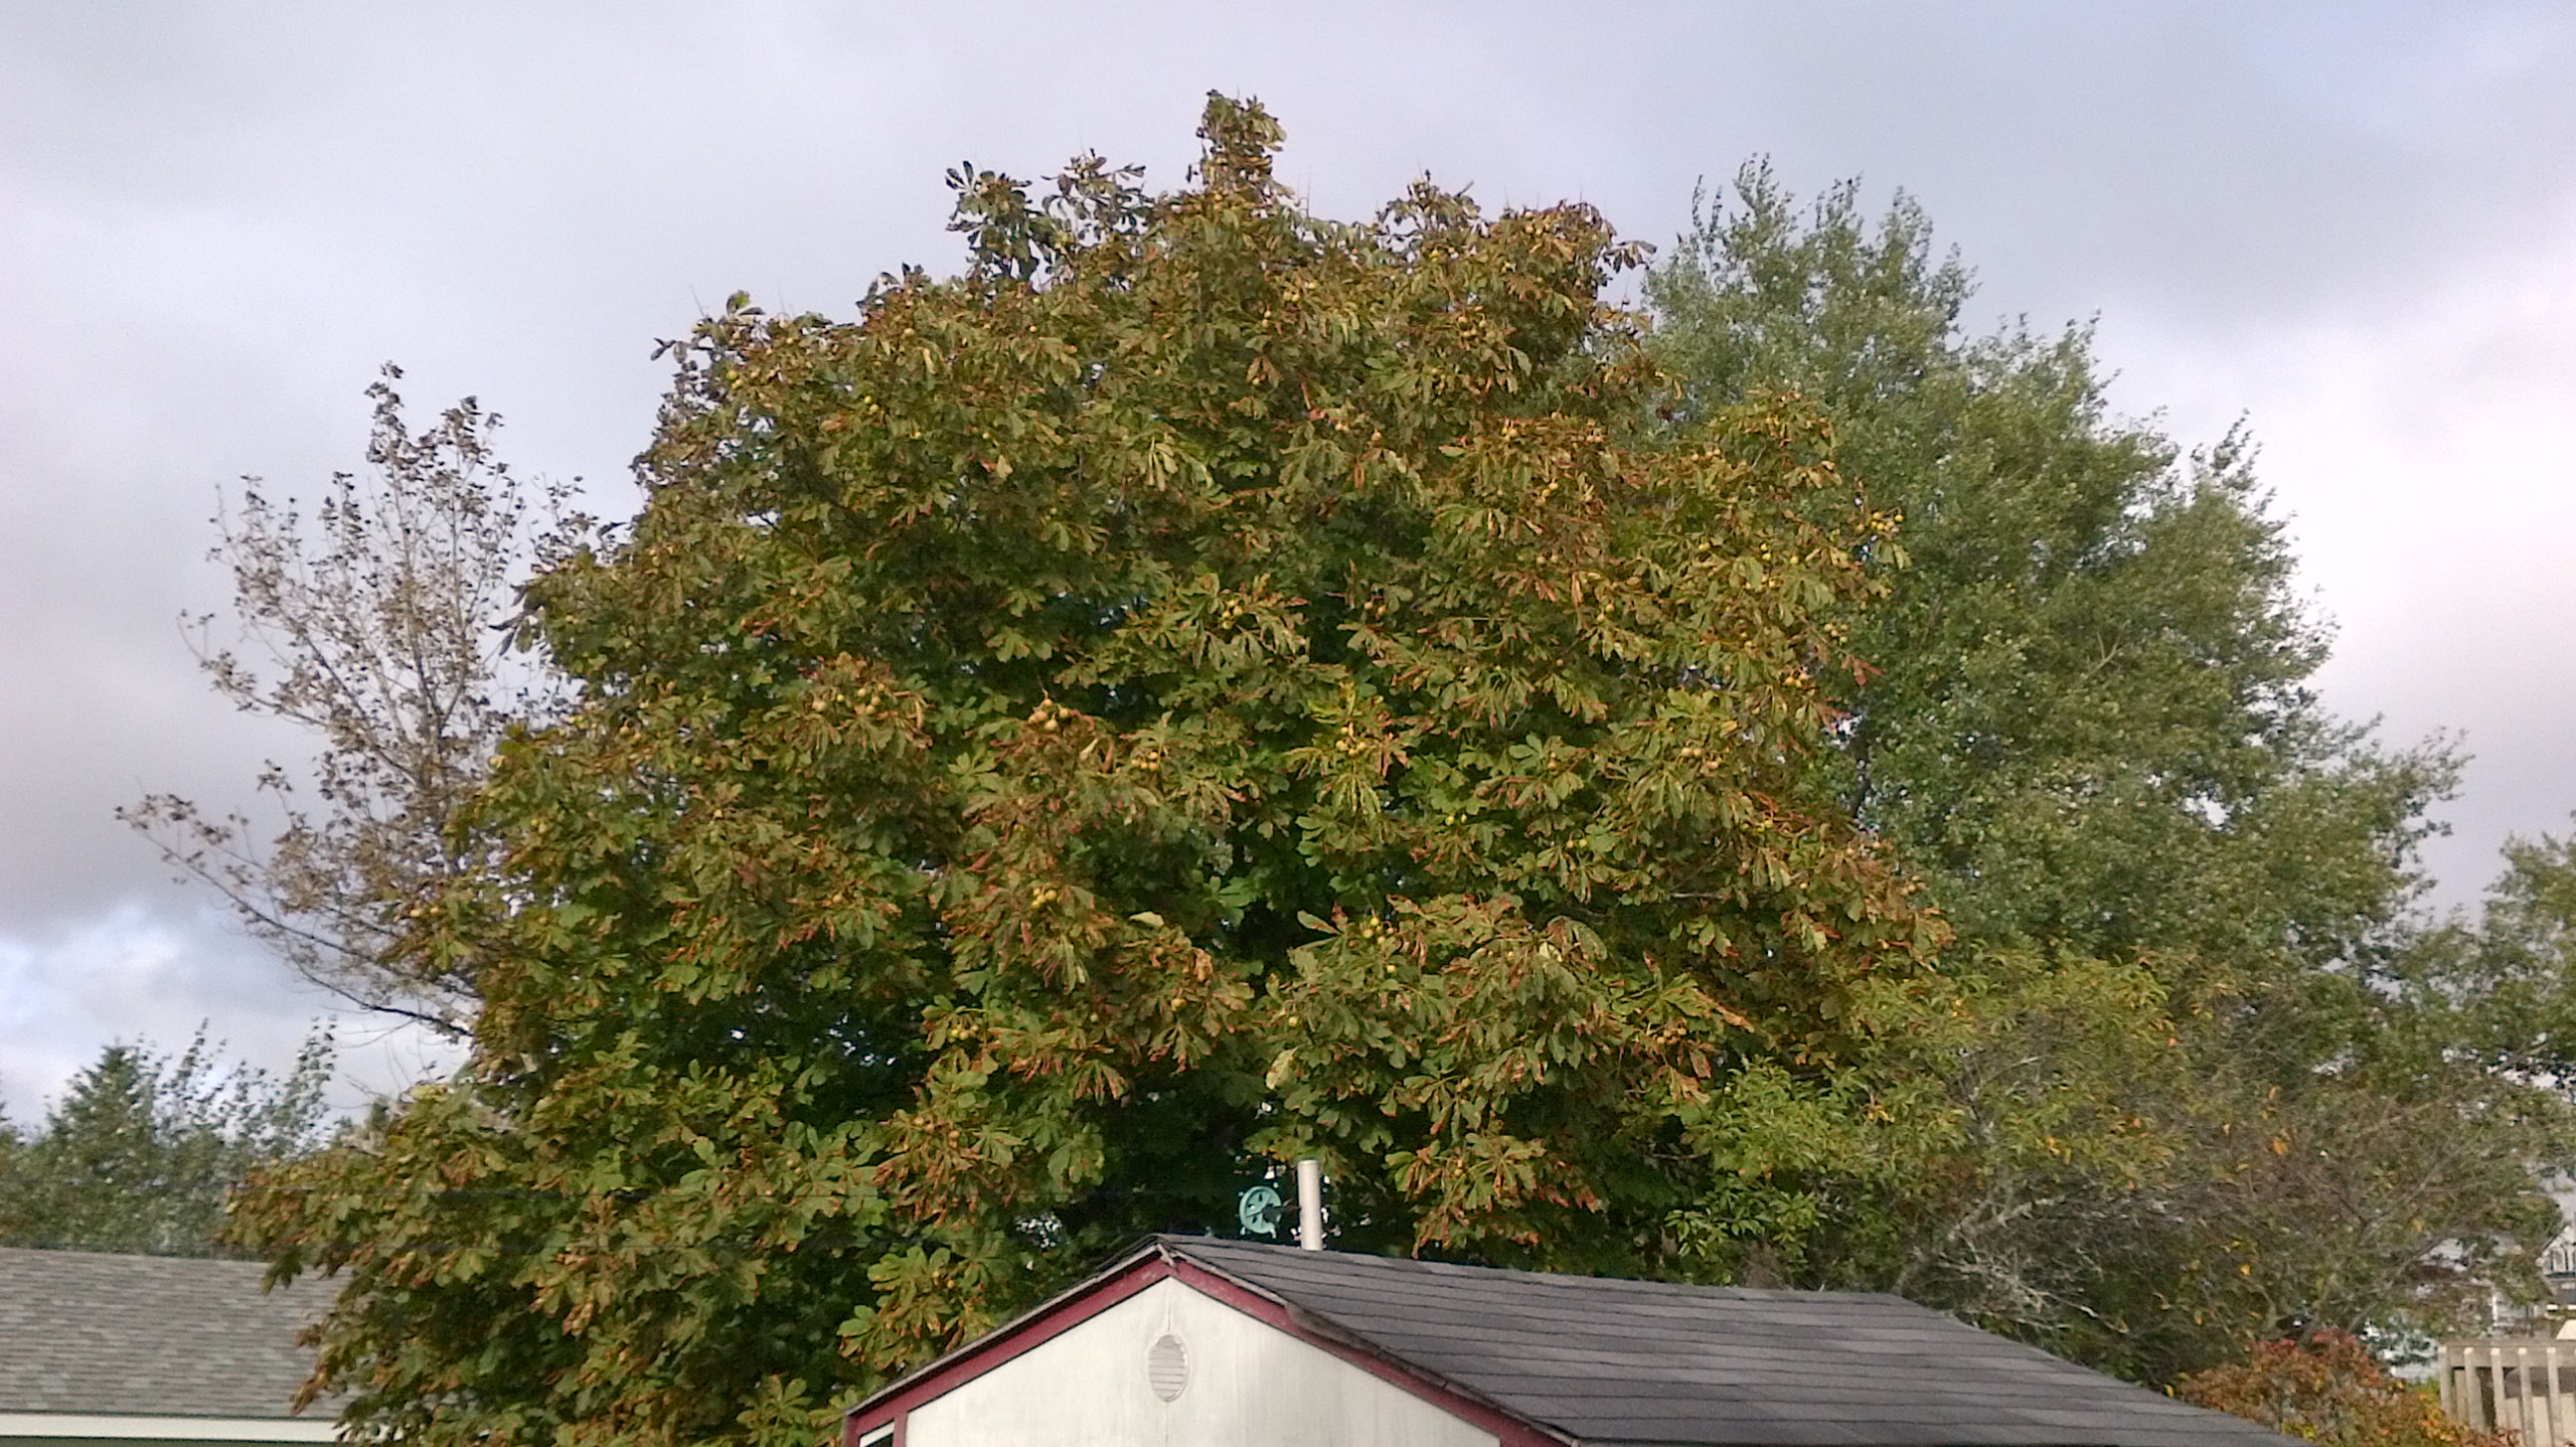 Leaves Starting to Change Colors